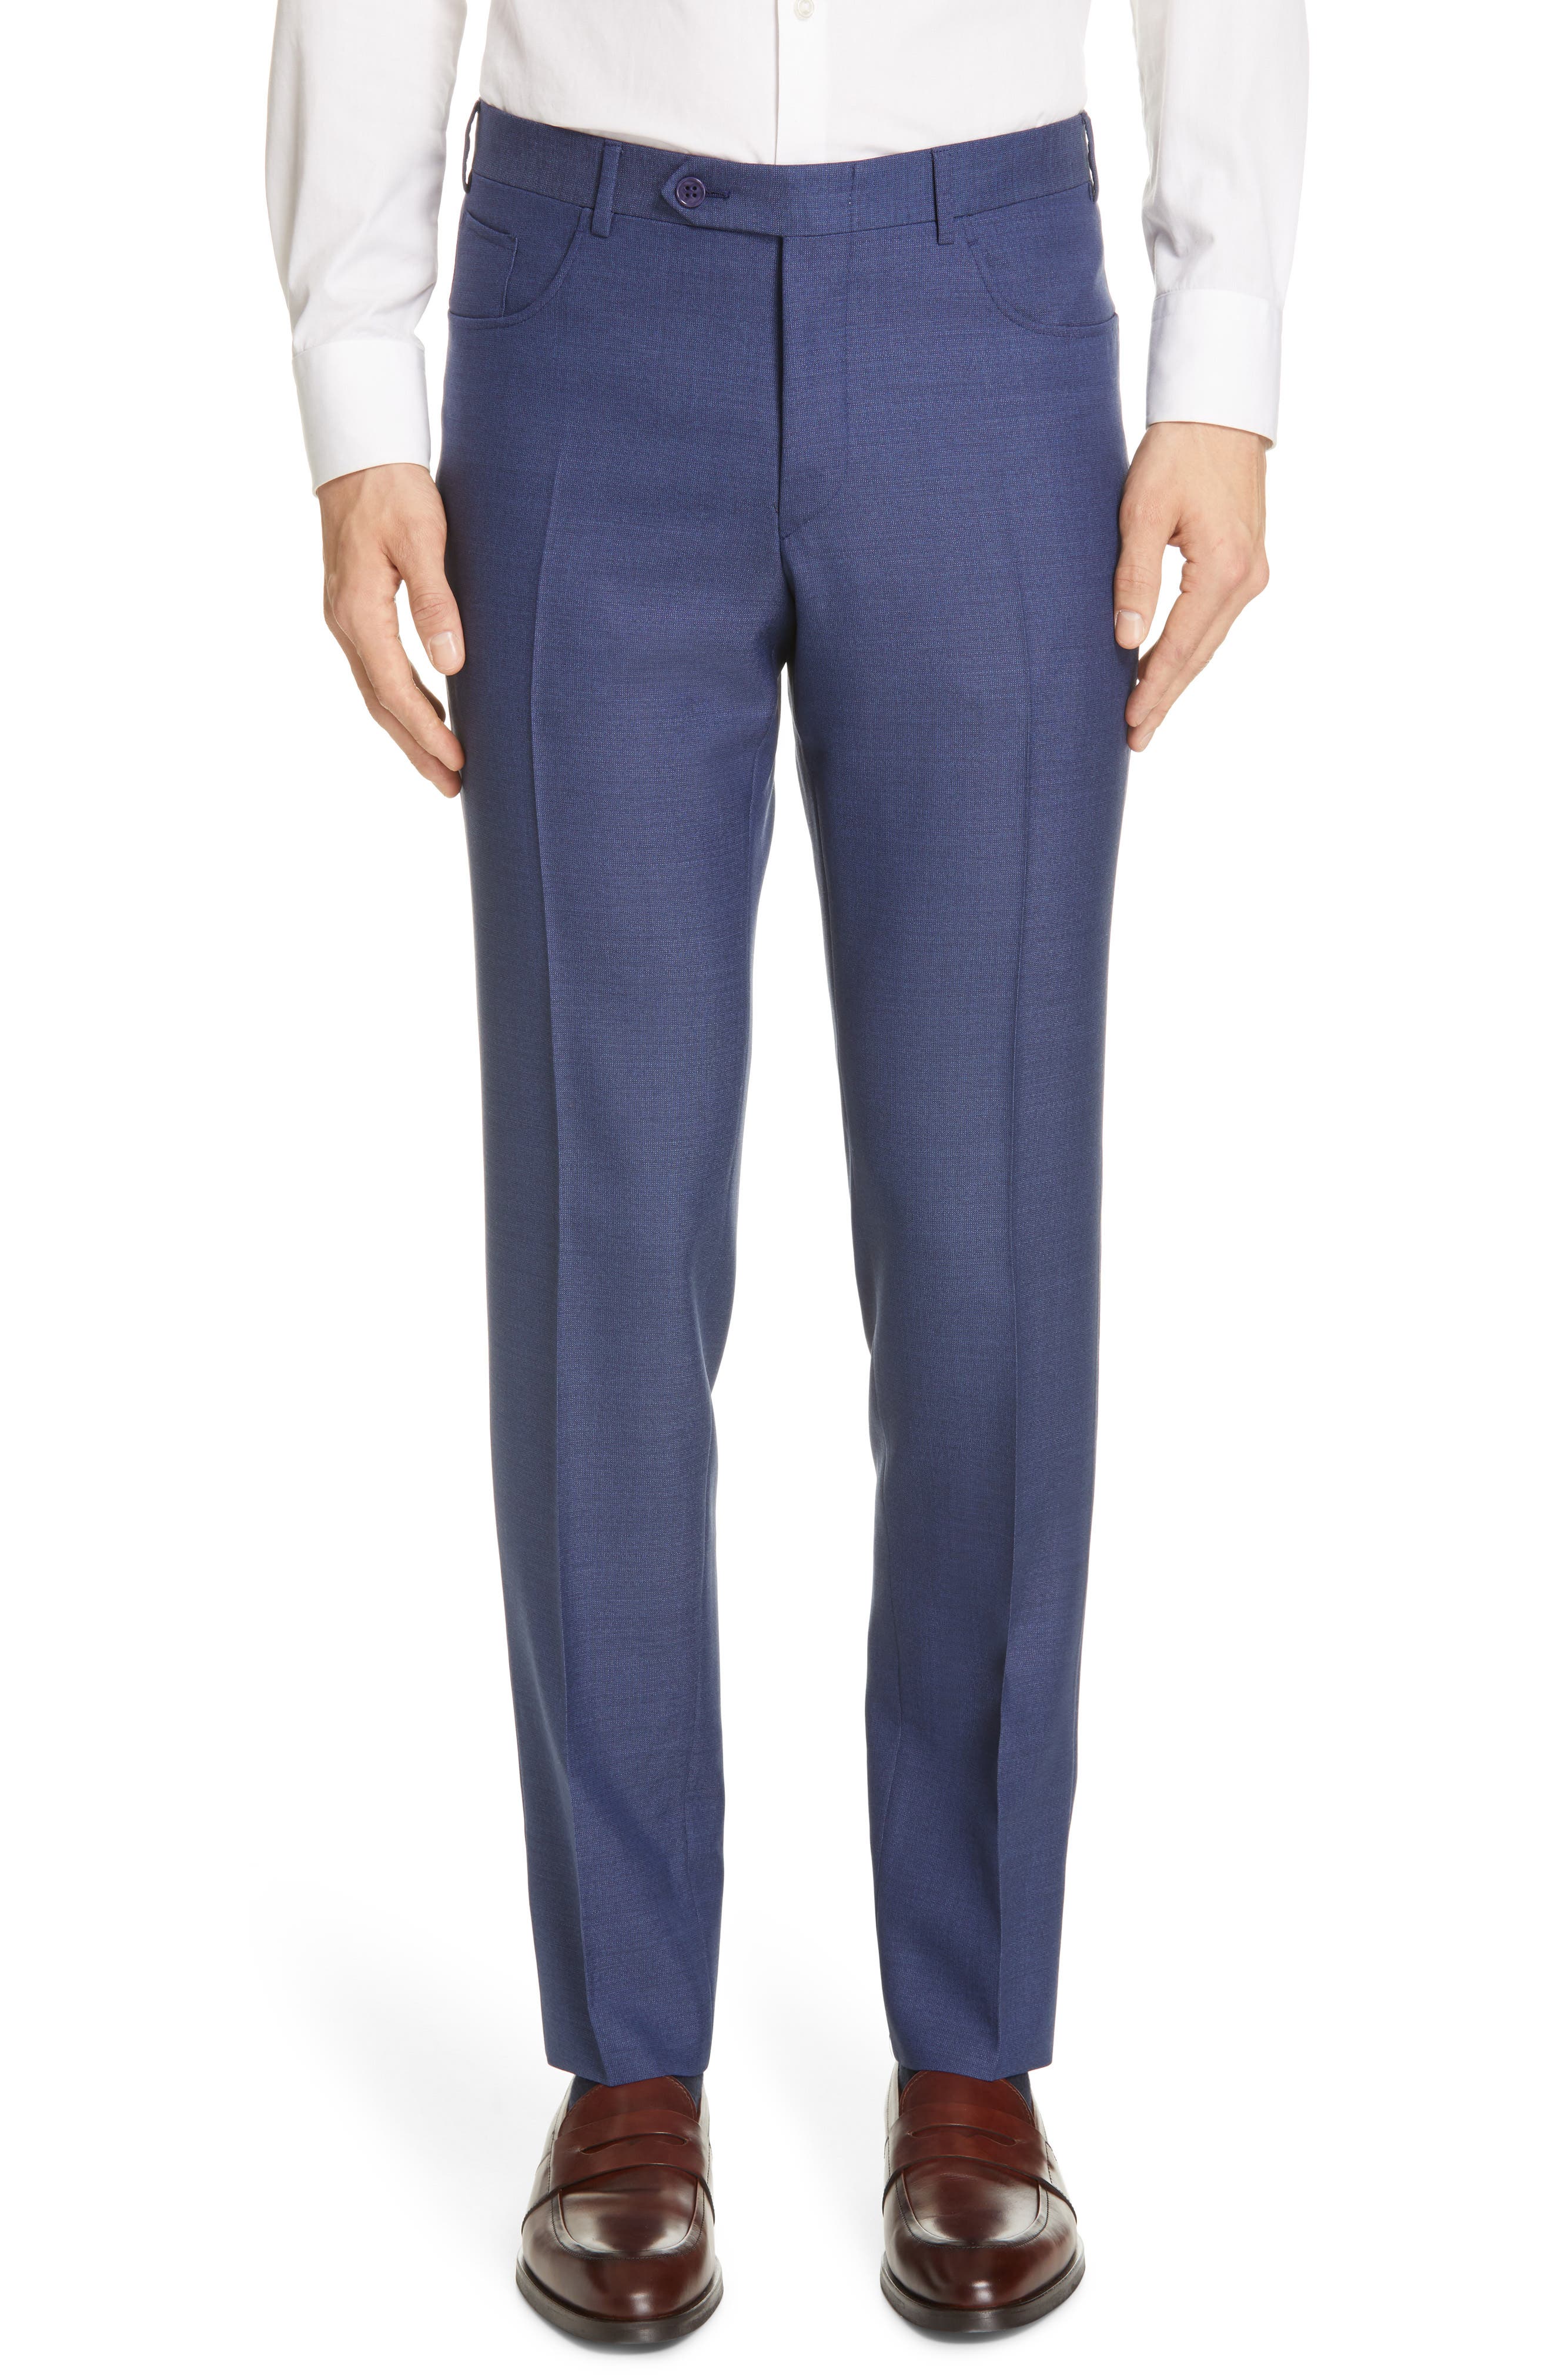 Canali | Five Pocket Slim Fit Wool Travel Trousers | Nordstrom Rack